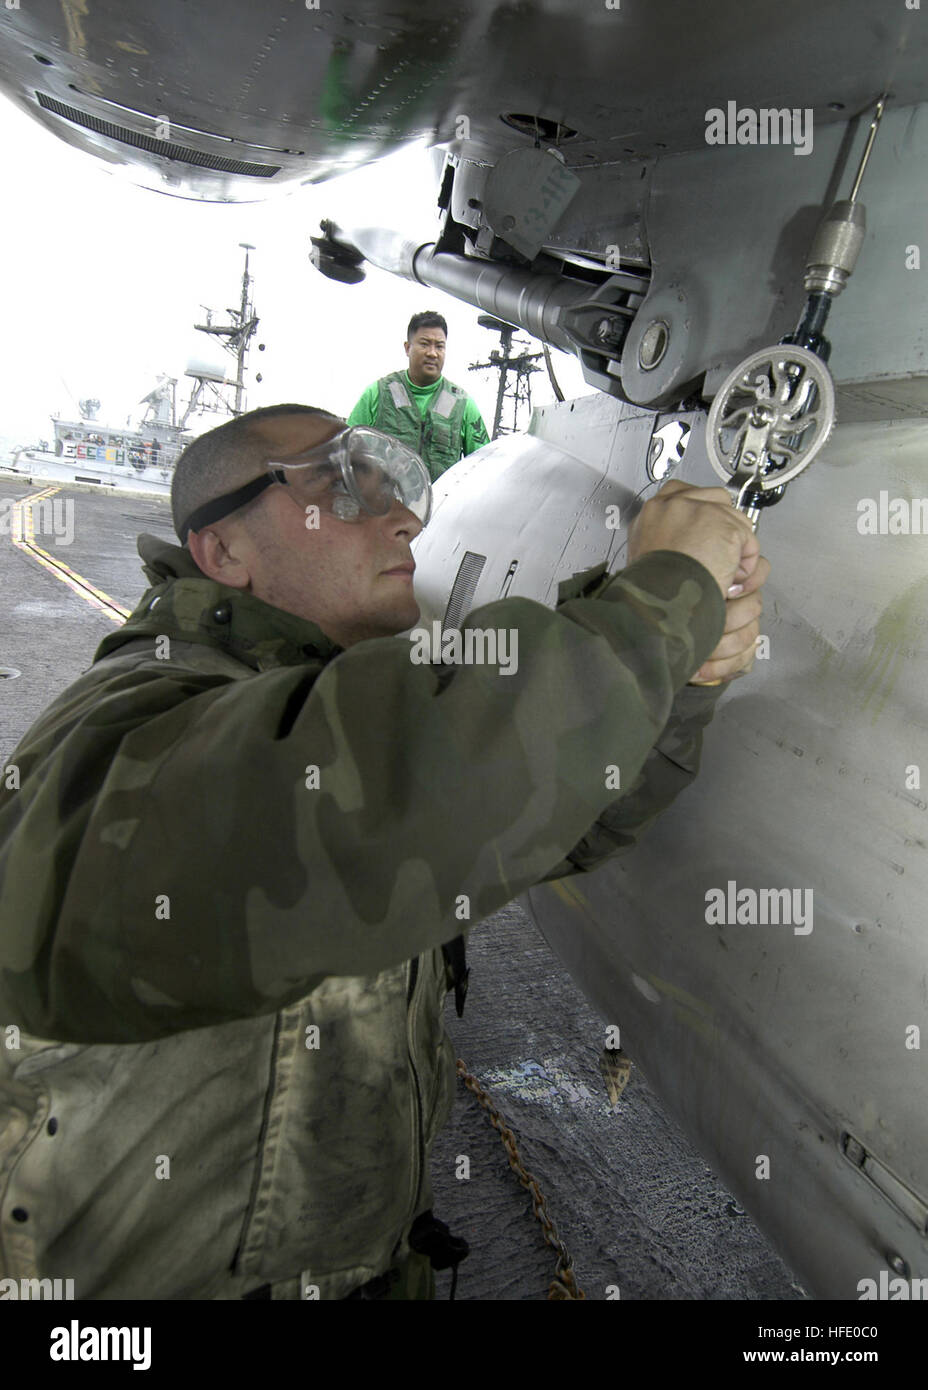 040607-N-7748K-027 Atlantic Ocean (June 7, 2004)--Aviation Structural Mechanic Airman Morris L. Rodrigues of Espanol, N.M. perfoms an inspection on an F/A-18 Hornet. Official  U.S. Navy photo by Photographer's Mate Airman Joshua Kinter. Image released by LT K.R. Stevens, PAO CVN-65. US Navy 040607-N-7748K-027 Aviation Structural Mechanic Airman Morris L. Rodrigues of Espanol, N.M. performs a maintenance inspection on an F-A-18 Hornet aboard USS Enterprise (CV 65) Stock Photo